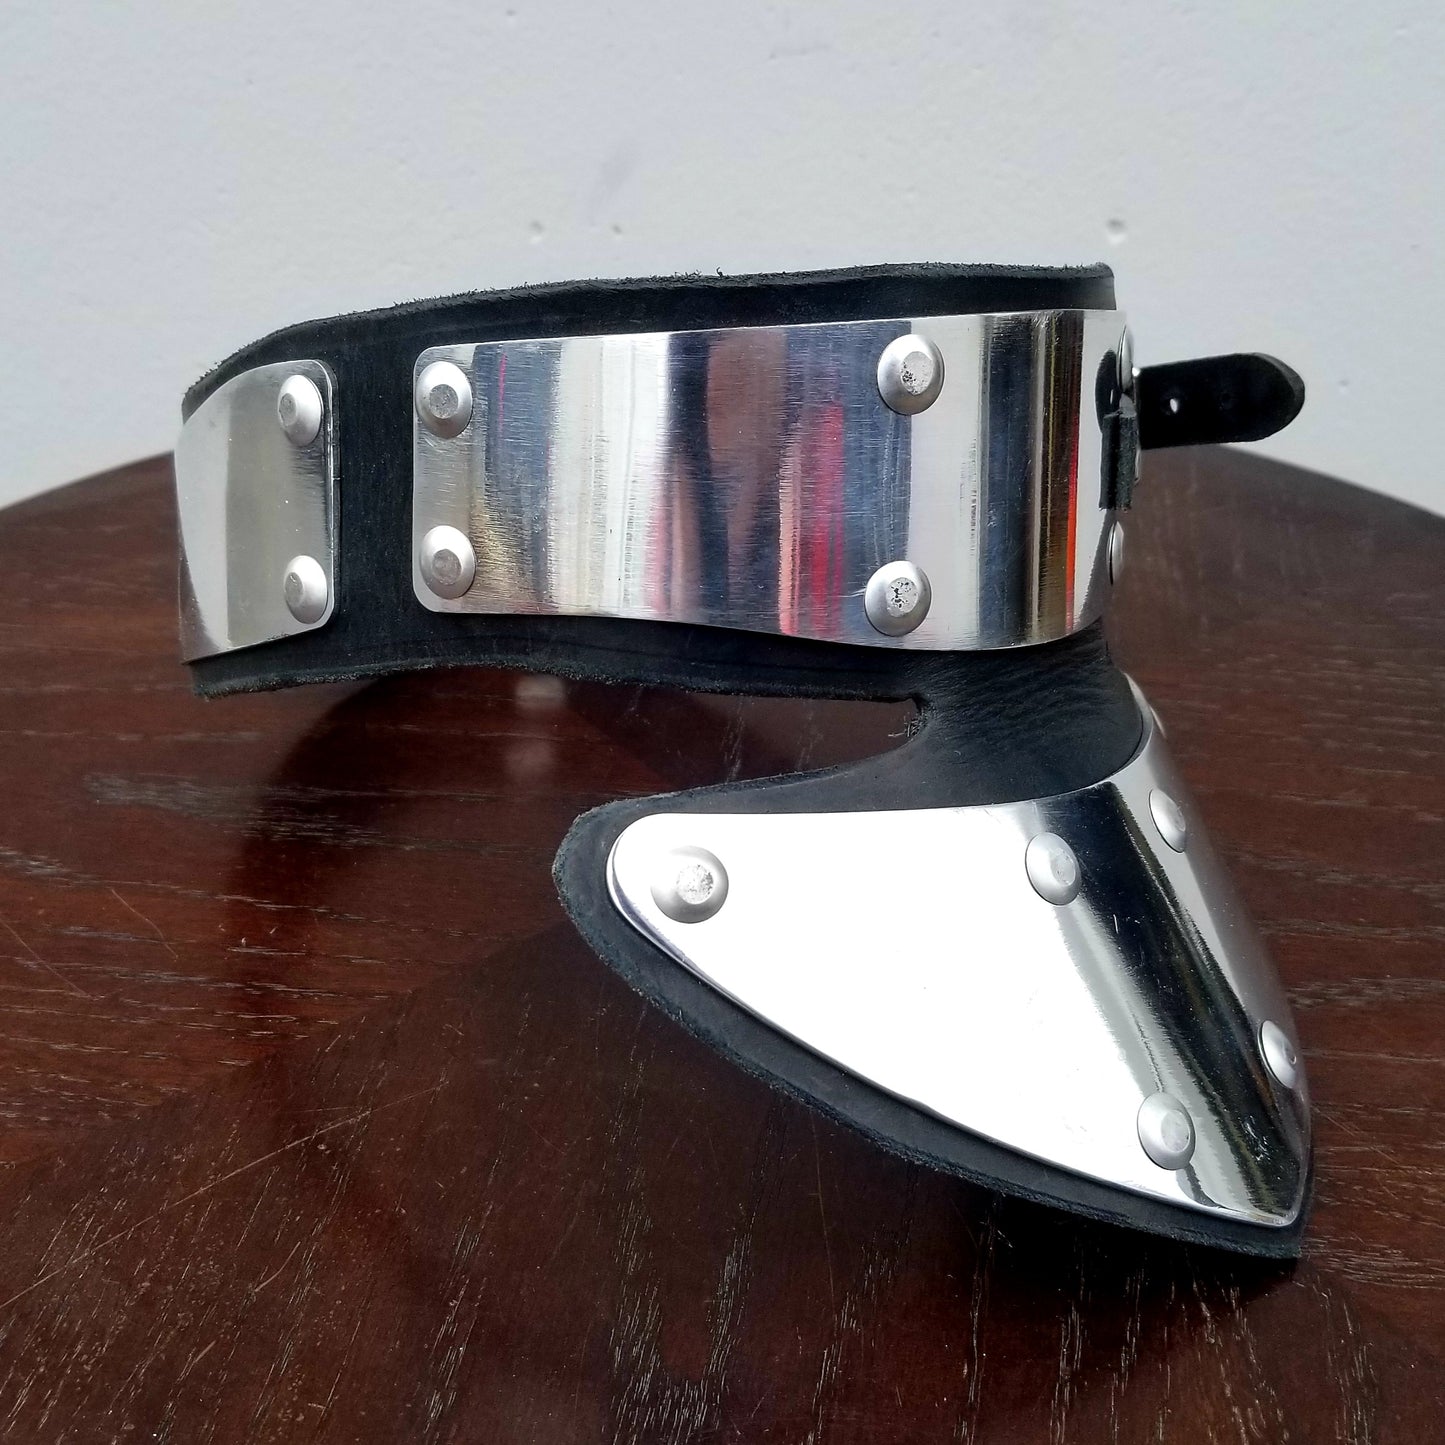 Aluminum and Leather SCA Collar Gorget - Medium/Large (adjustable) Right Side Opening